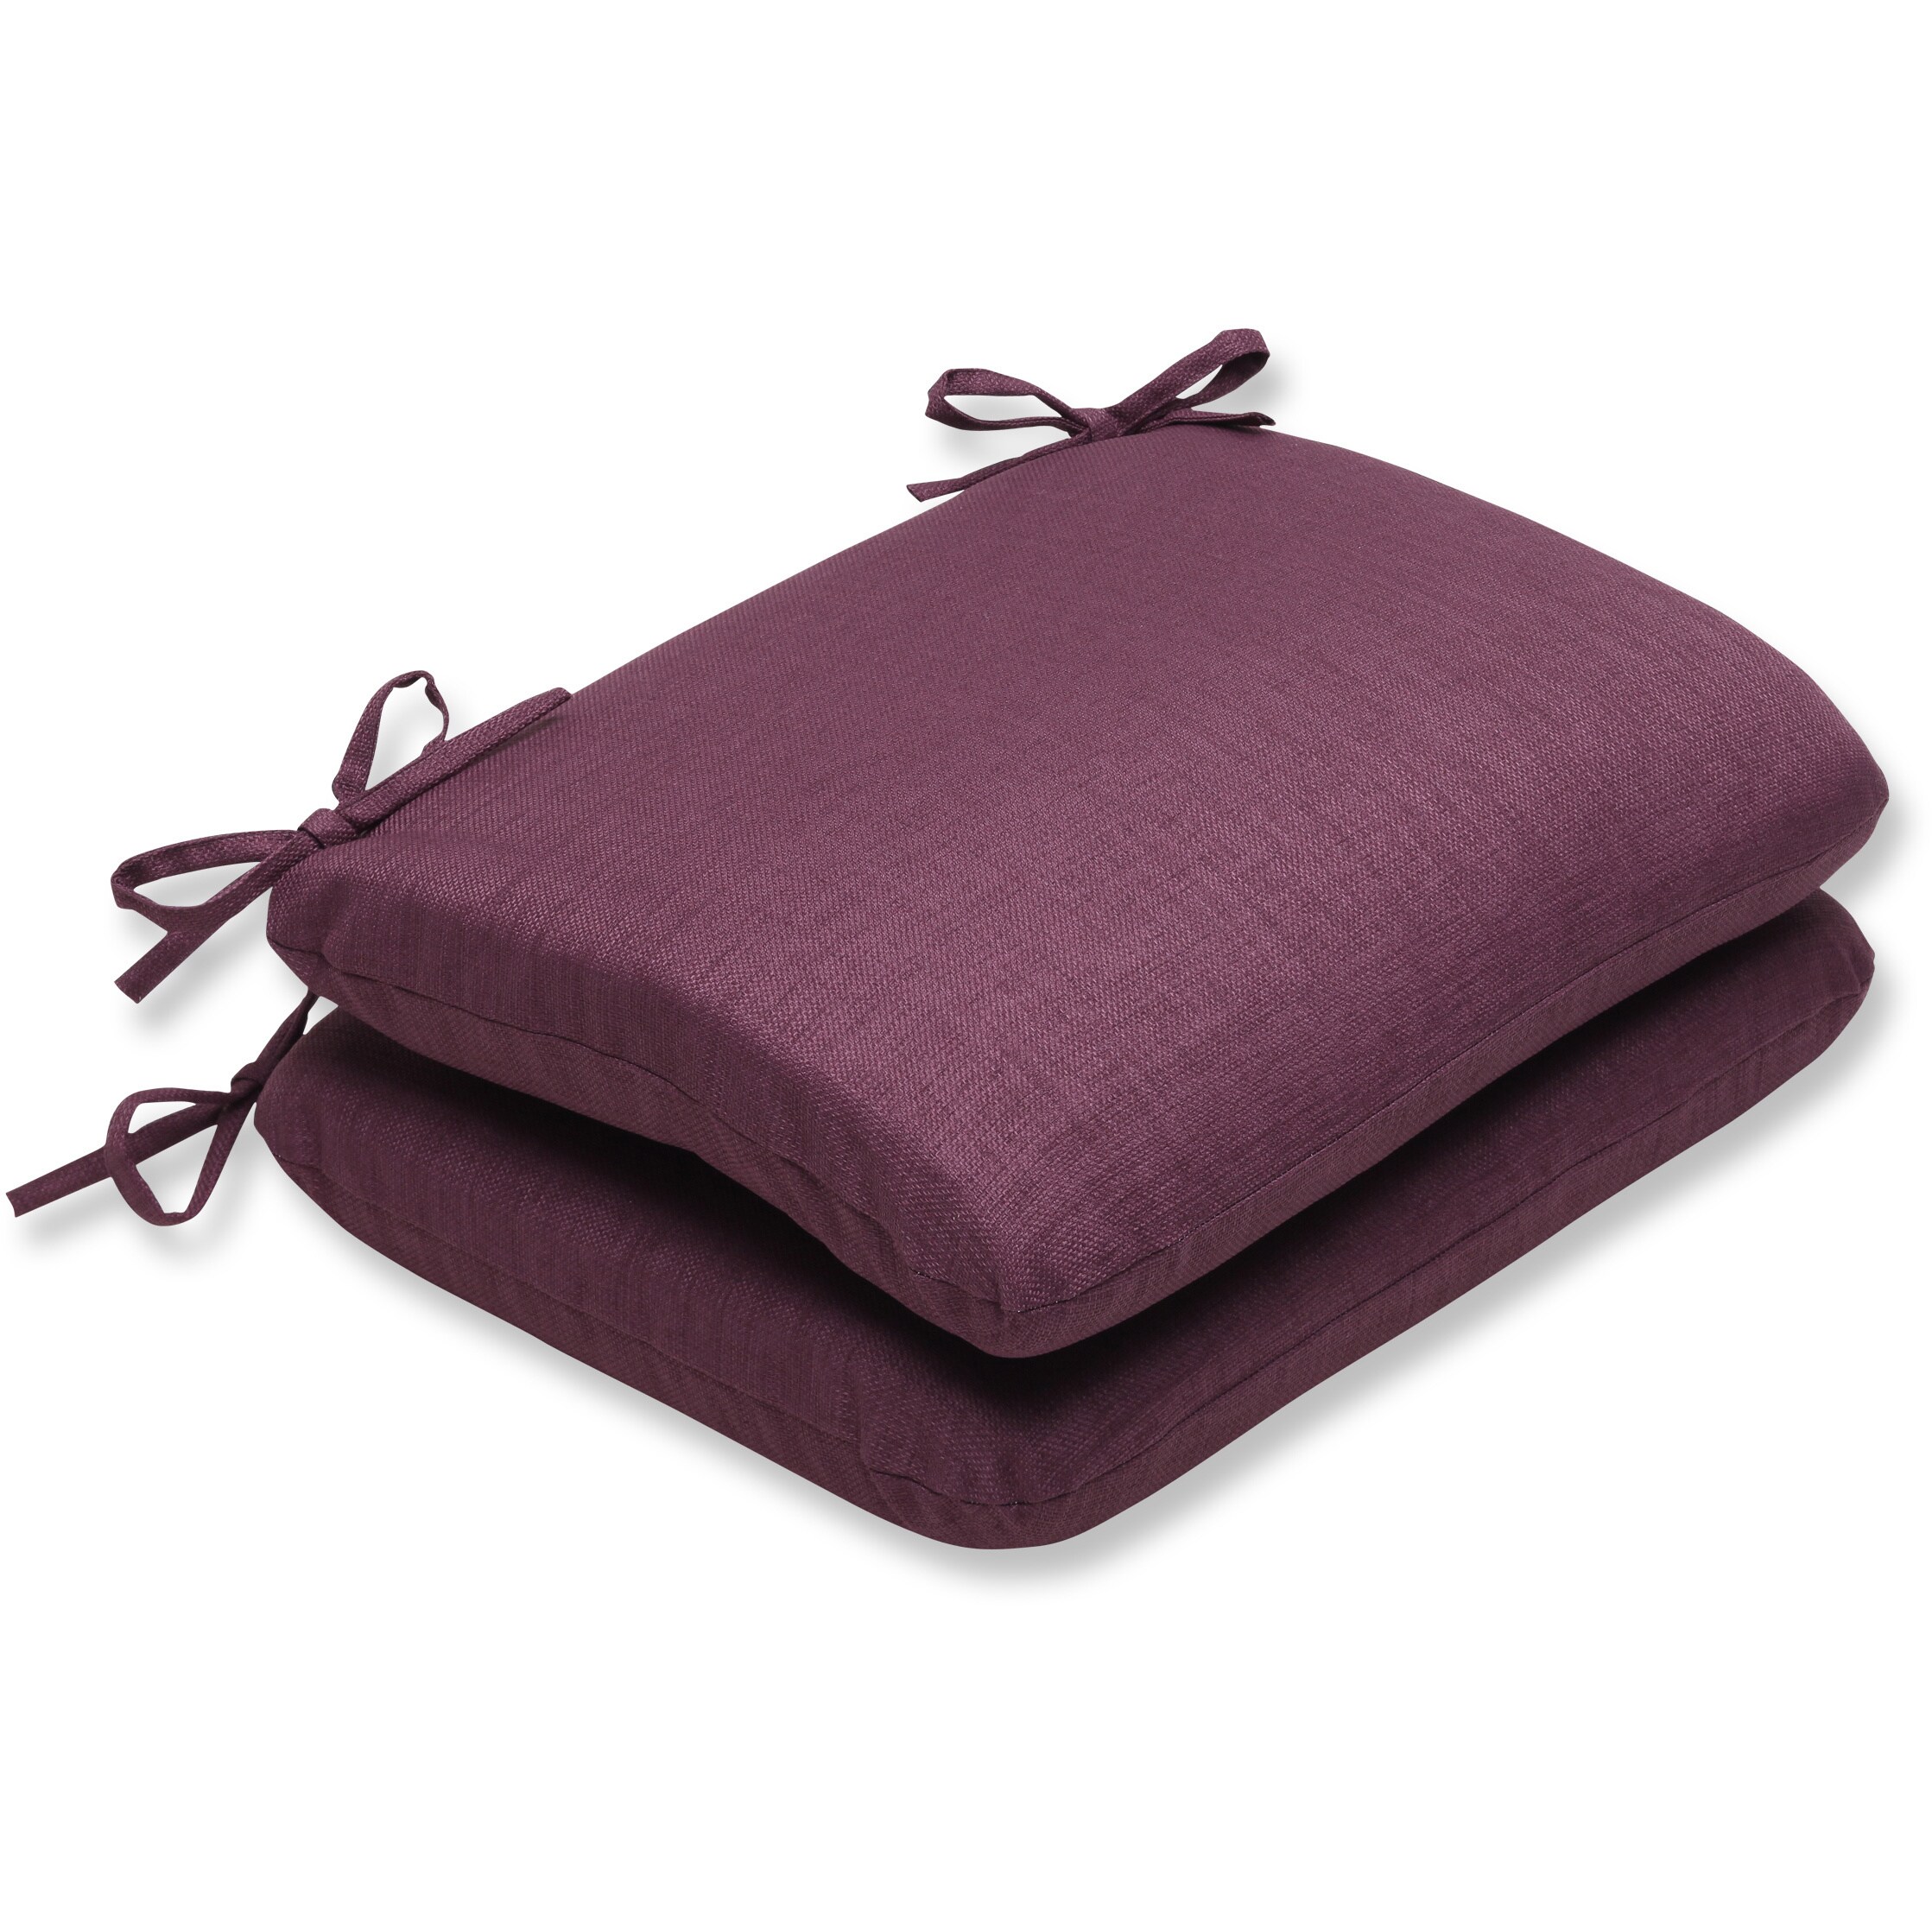 Pillow Perfect Outdoor Purple Rounded Corners Seat Cushion Purple | eBay